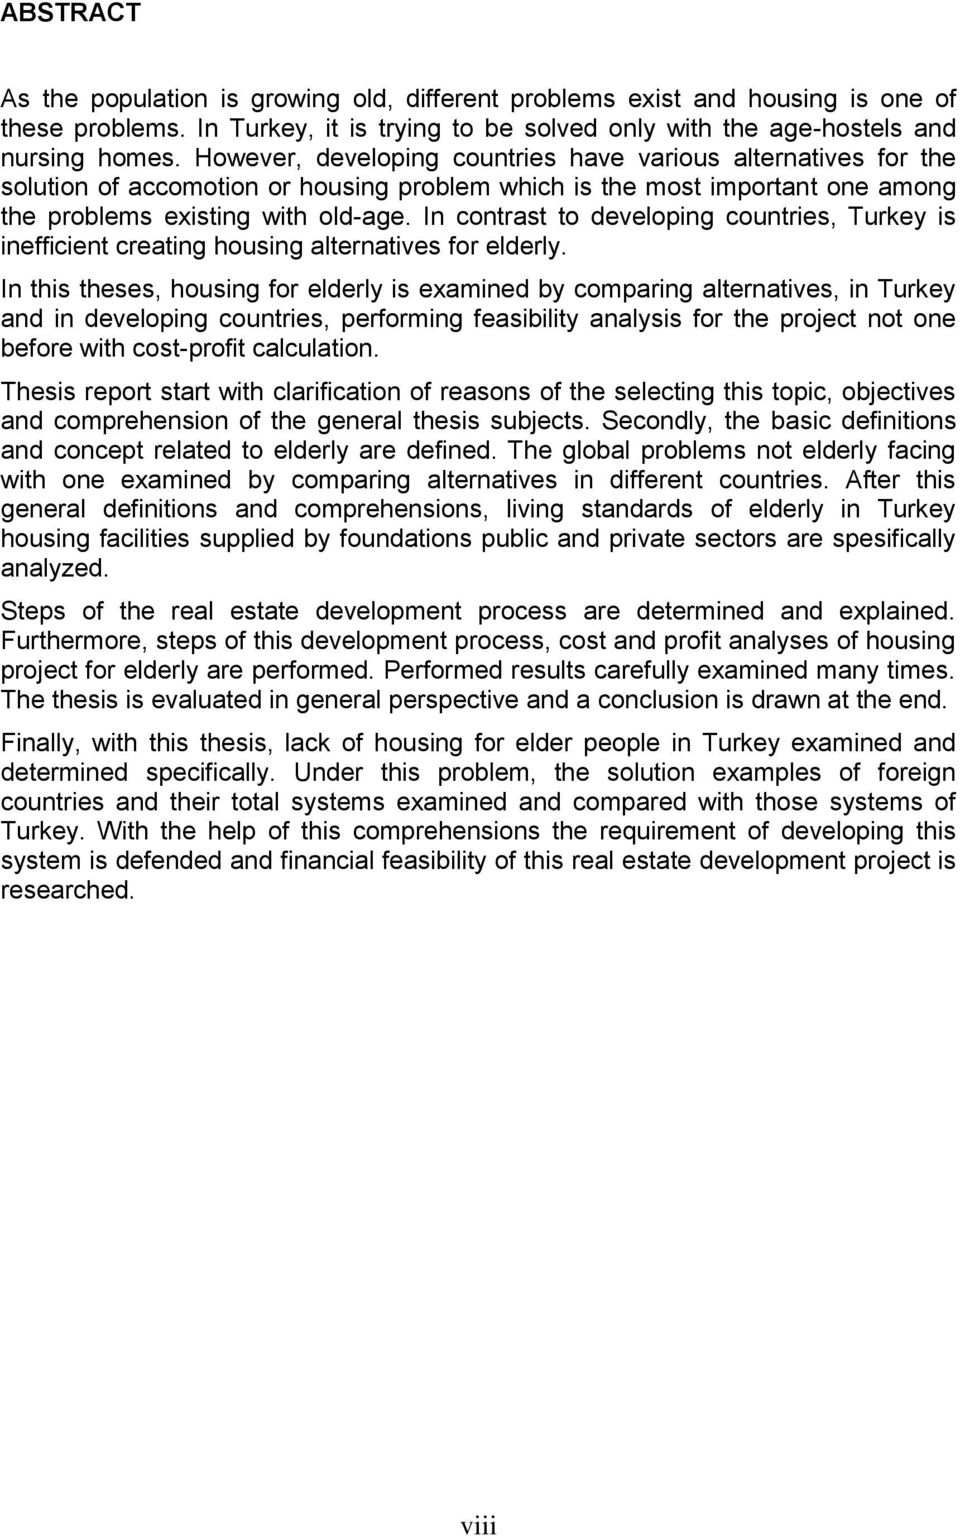 In contrast to developing countries, Turkey is inefficient creating housing alternatives for elderly.